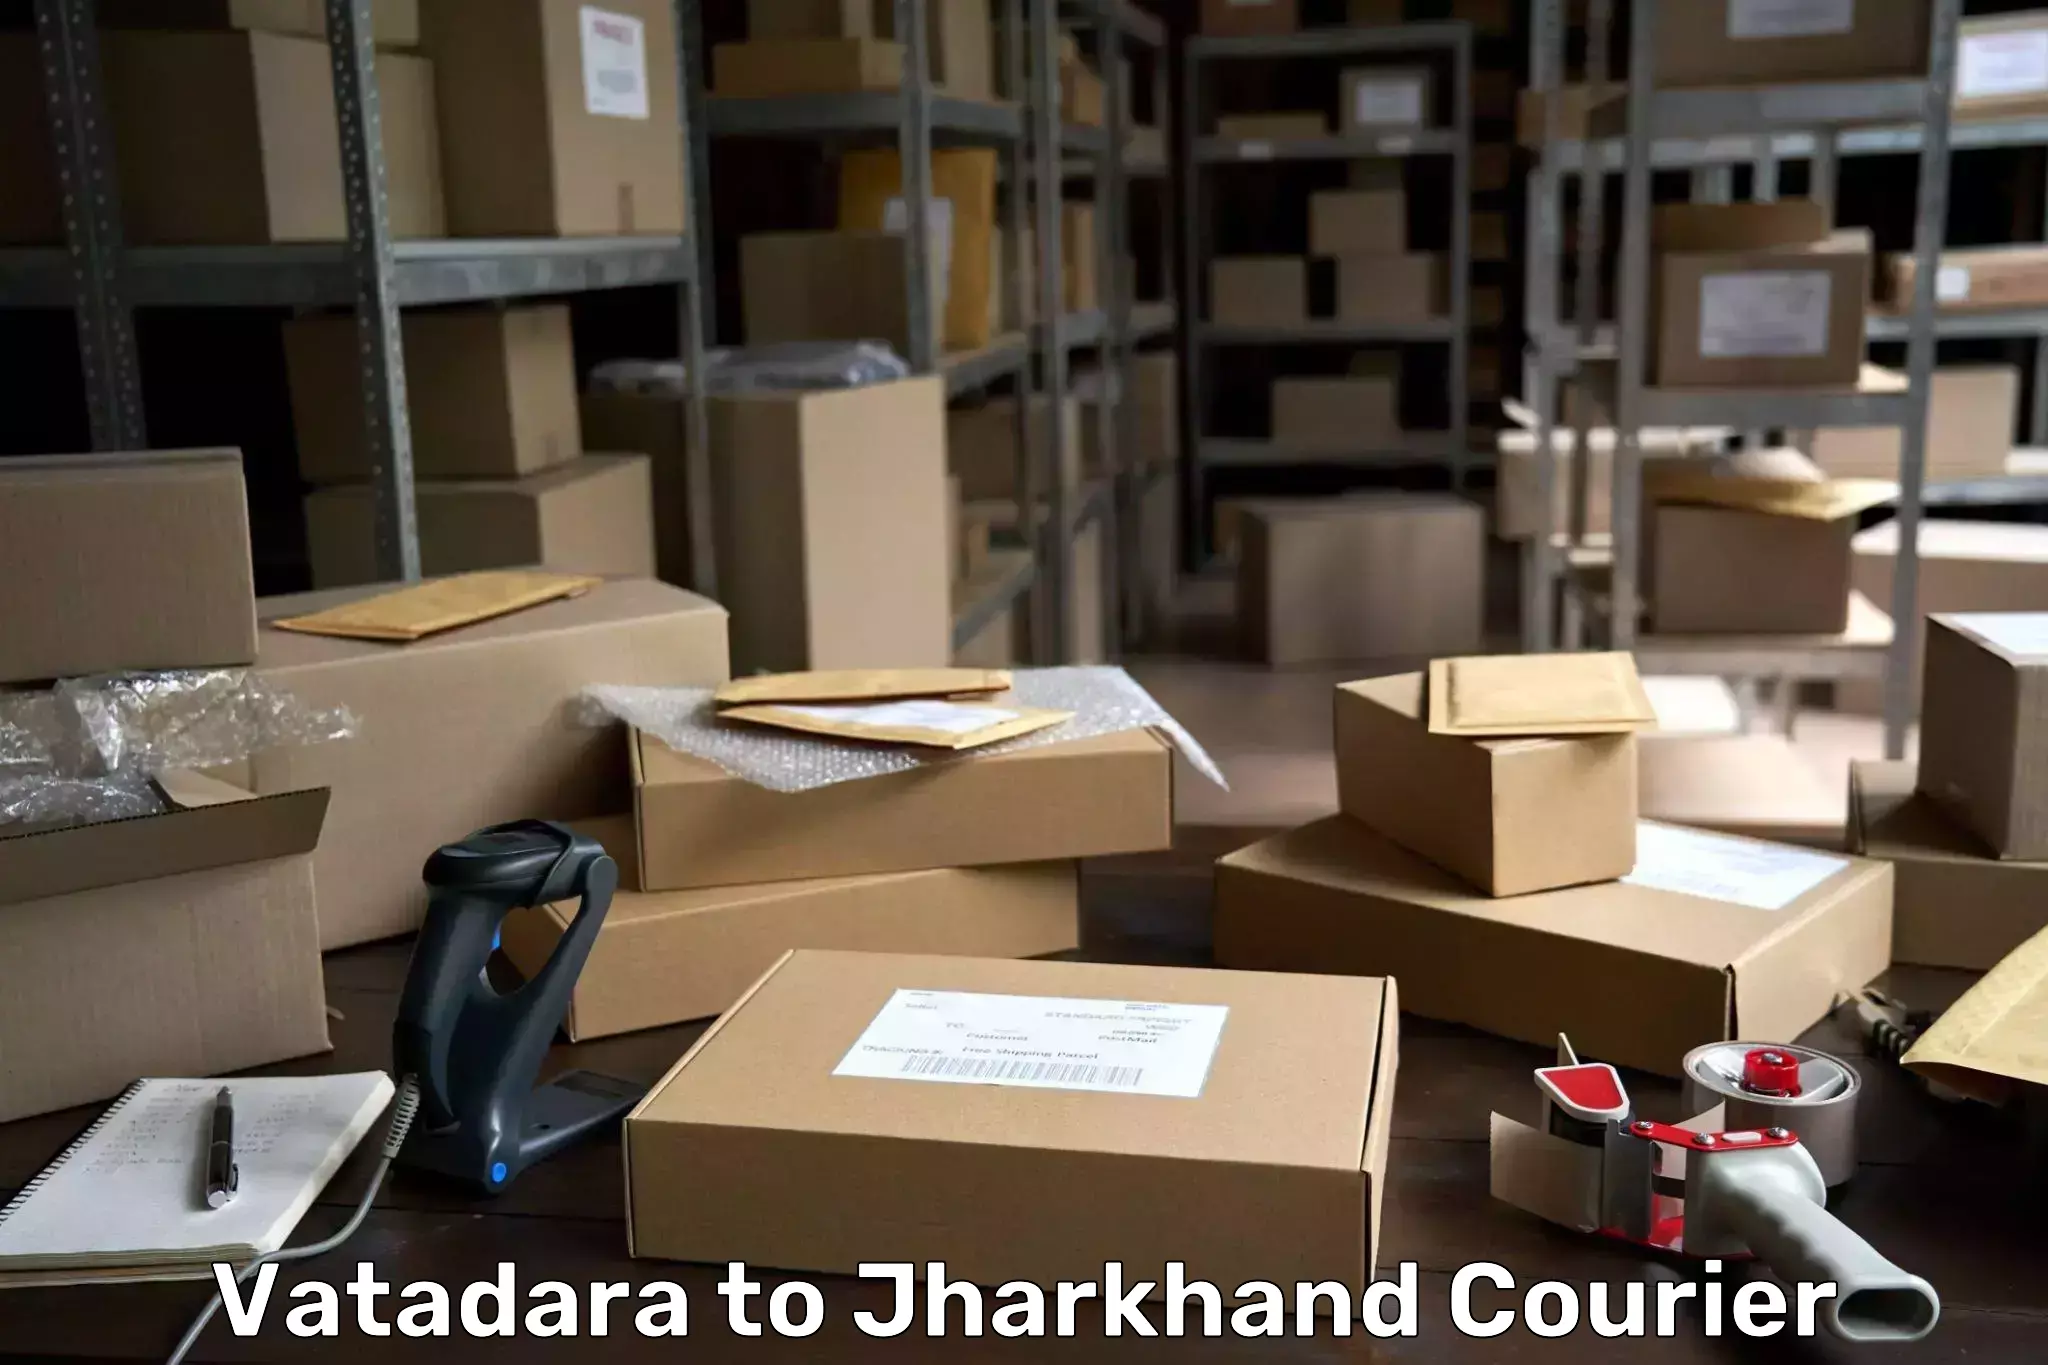 Multi-national courier services Vatadara to Jharkhand